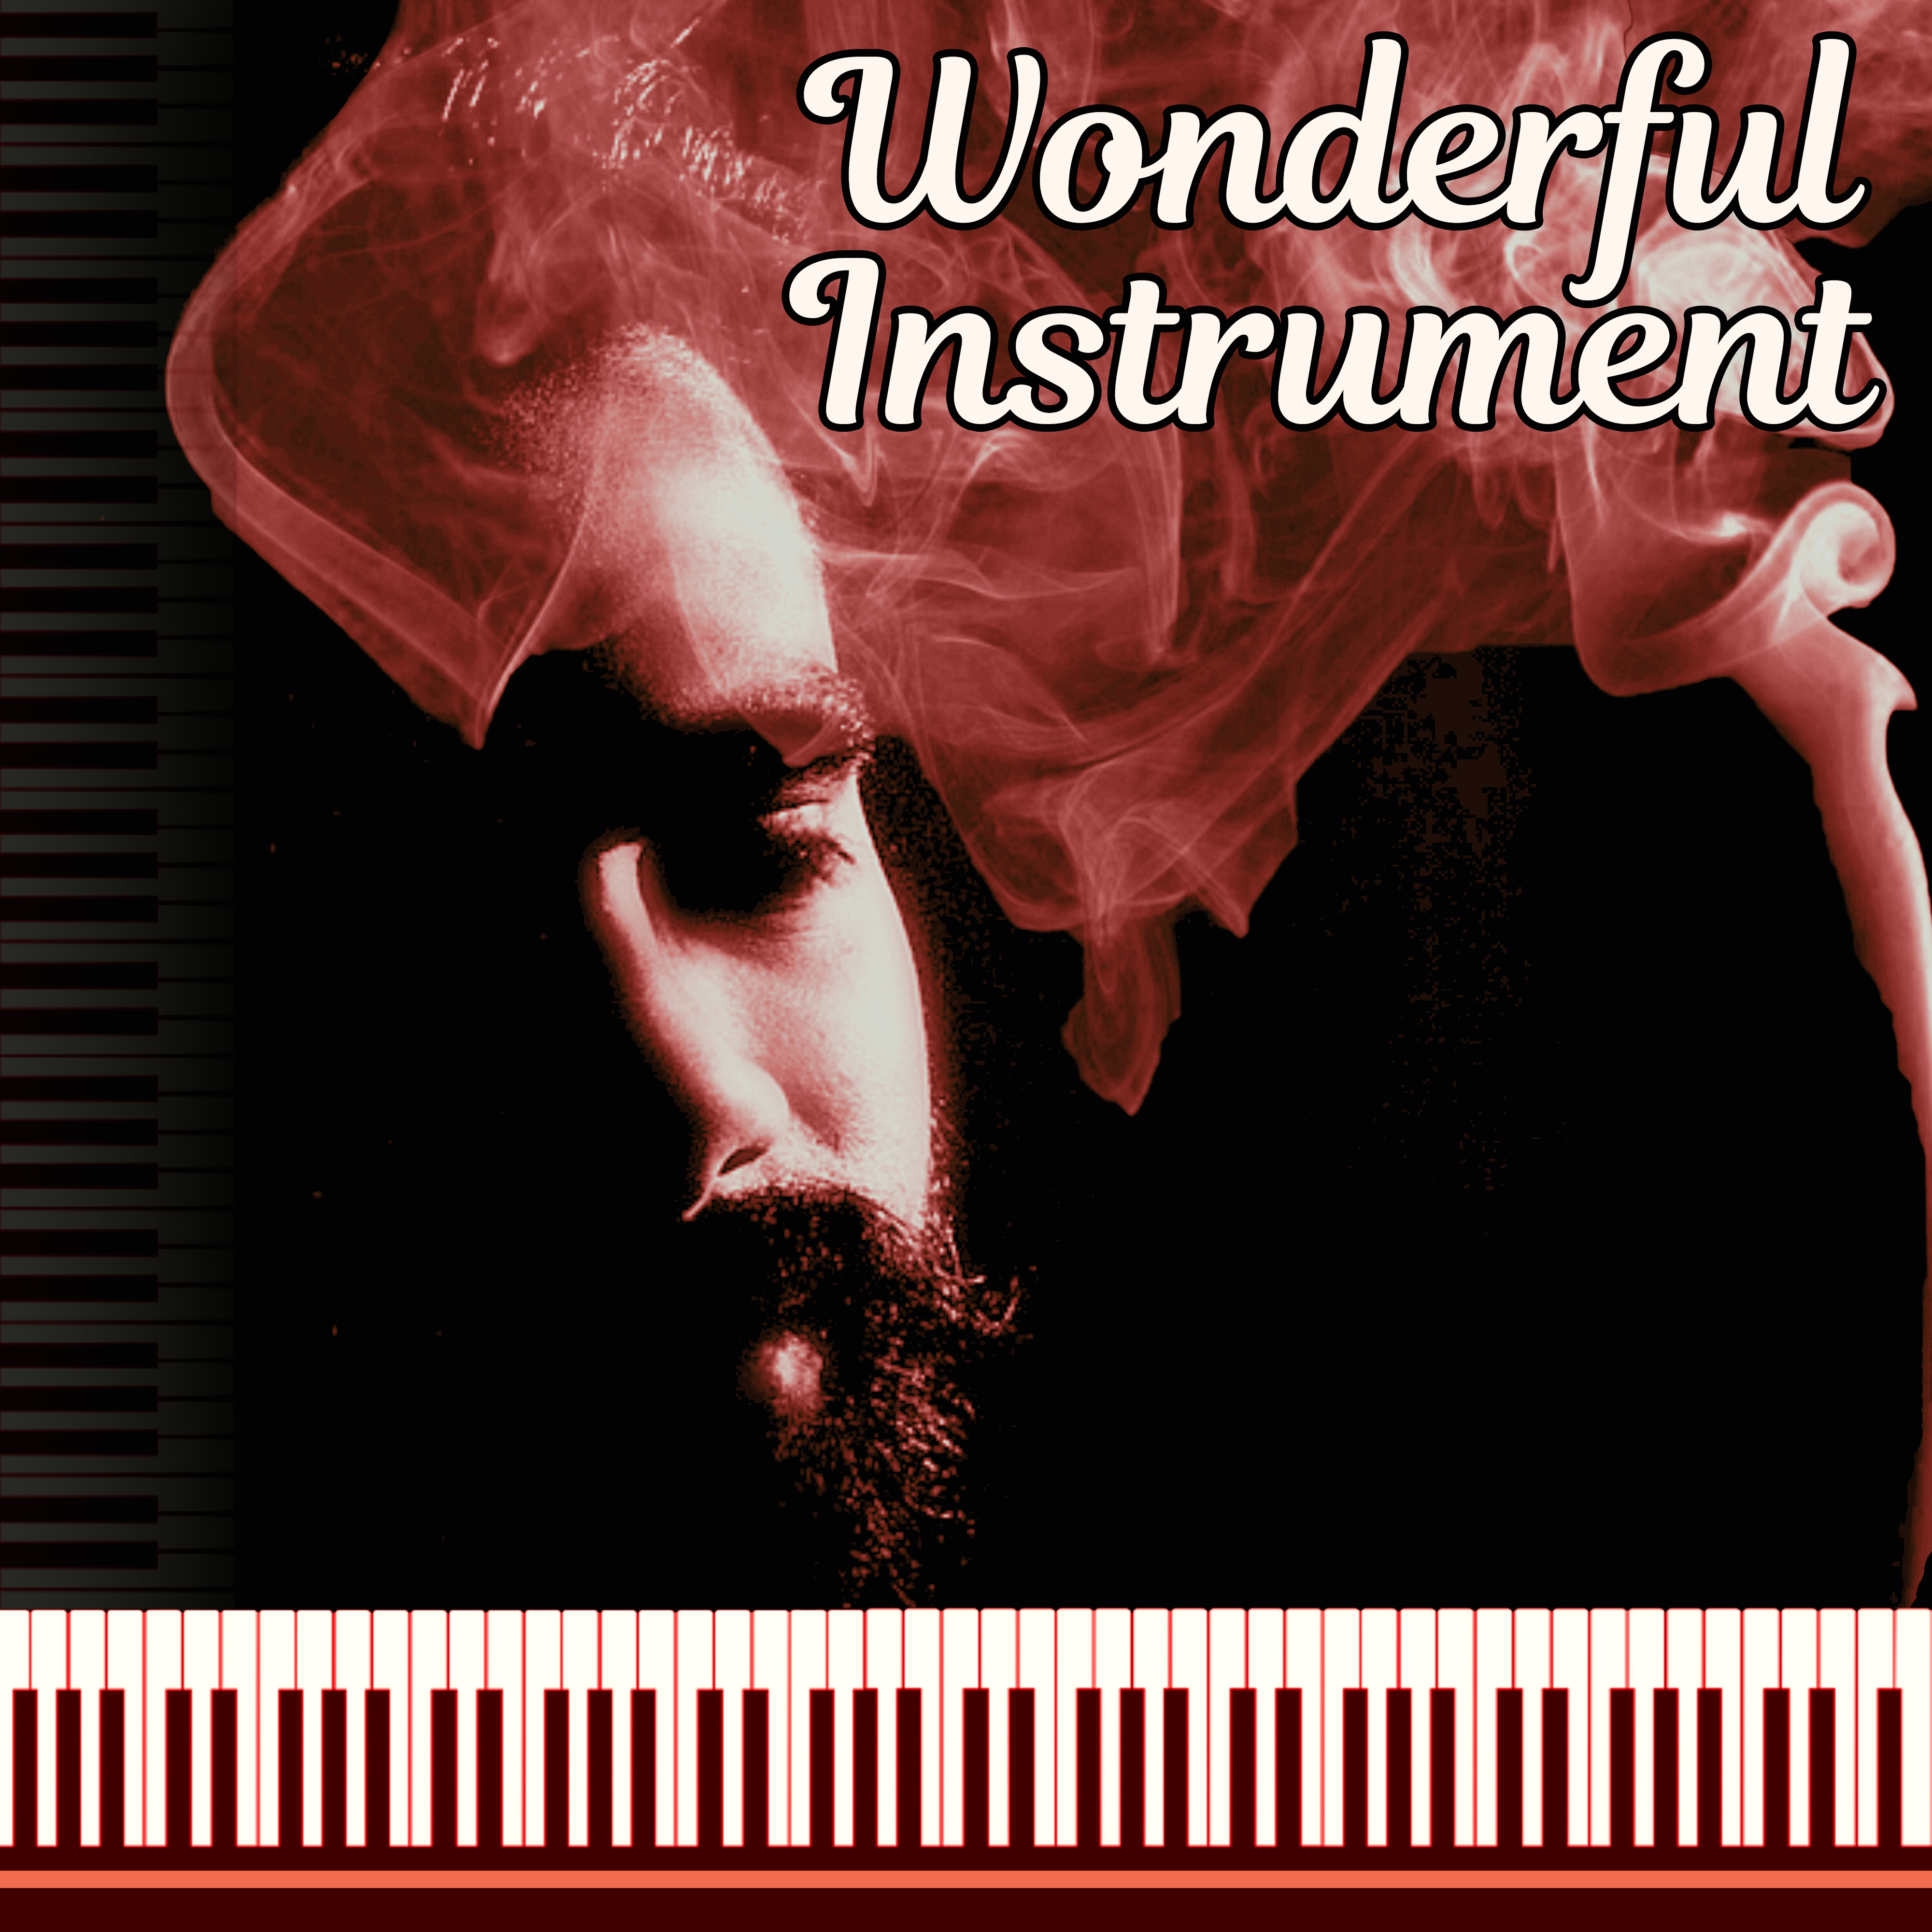 Wonderful Instrument - Free Game, Romantic Memories, Fall in love with Pianist, World of Illusion, Move the World of Dreams